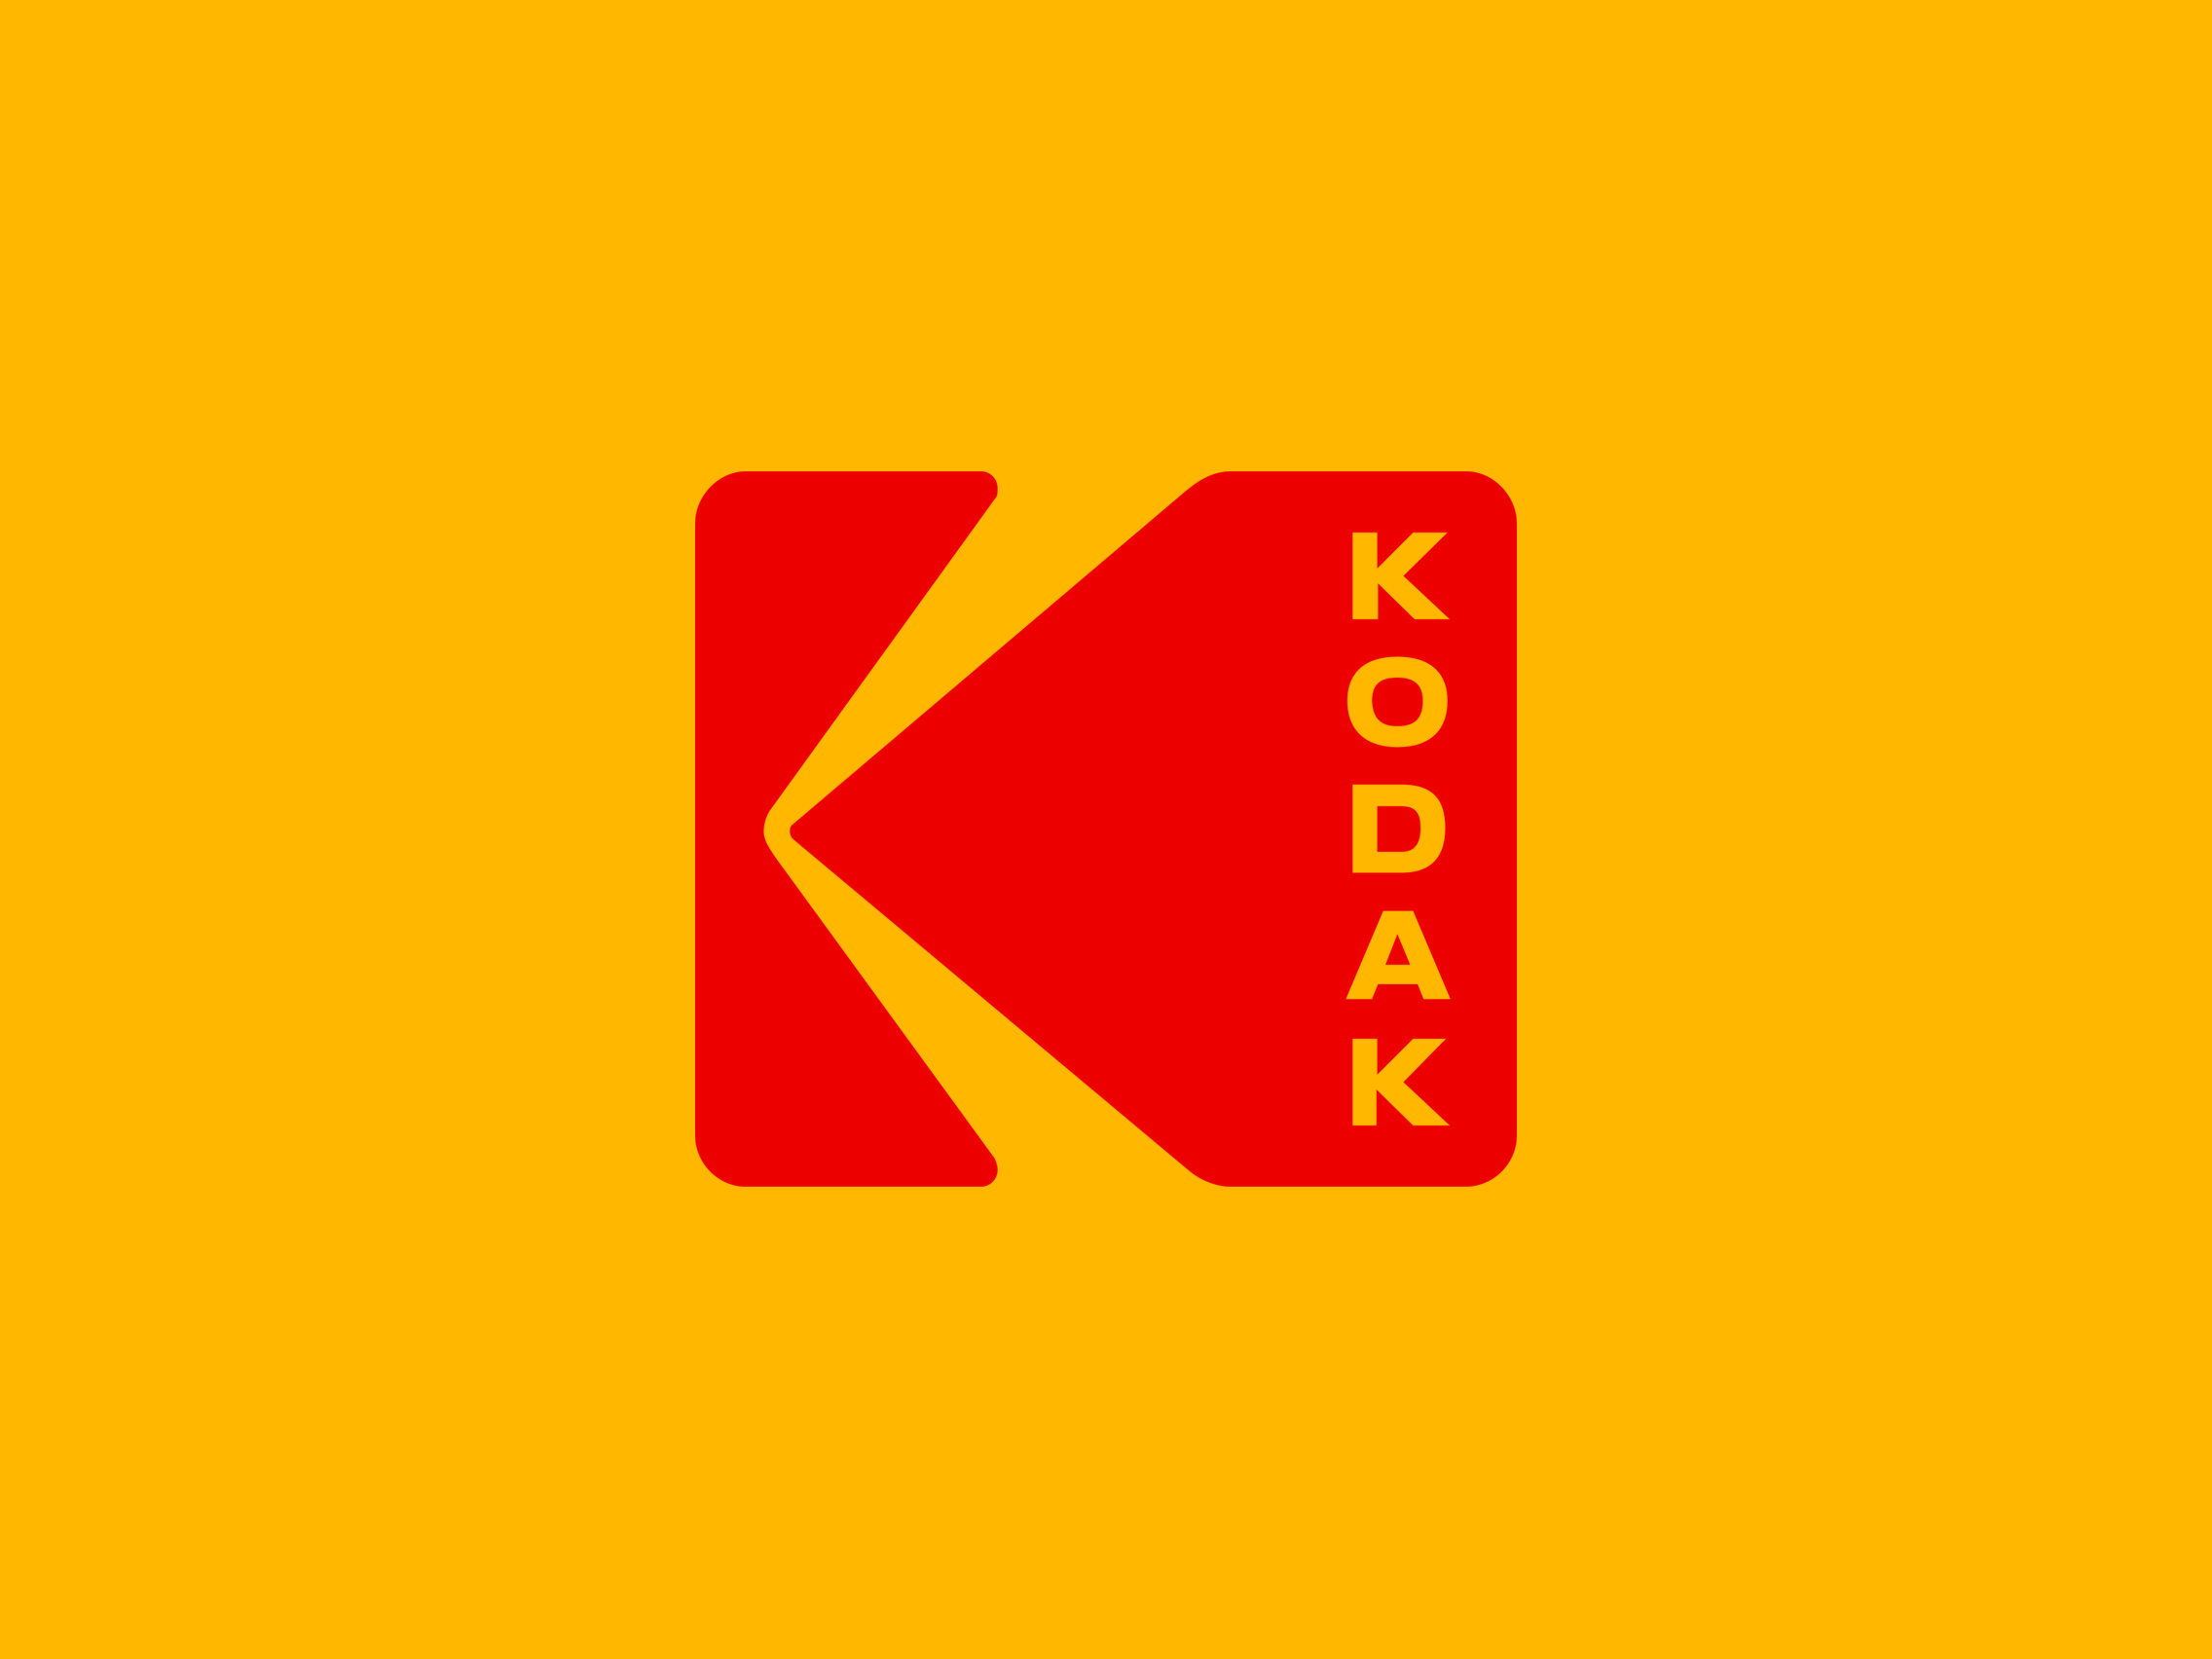 American with Red and Yellow Logo - Kodak Logo 2016 Red On Yellow